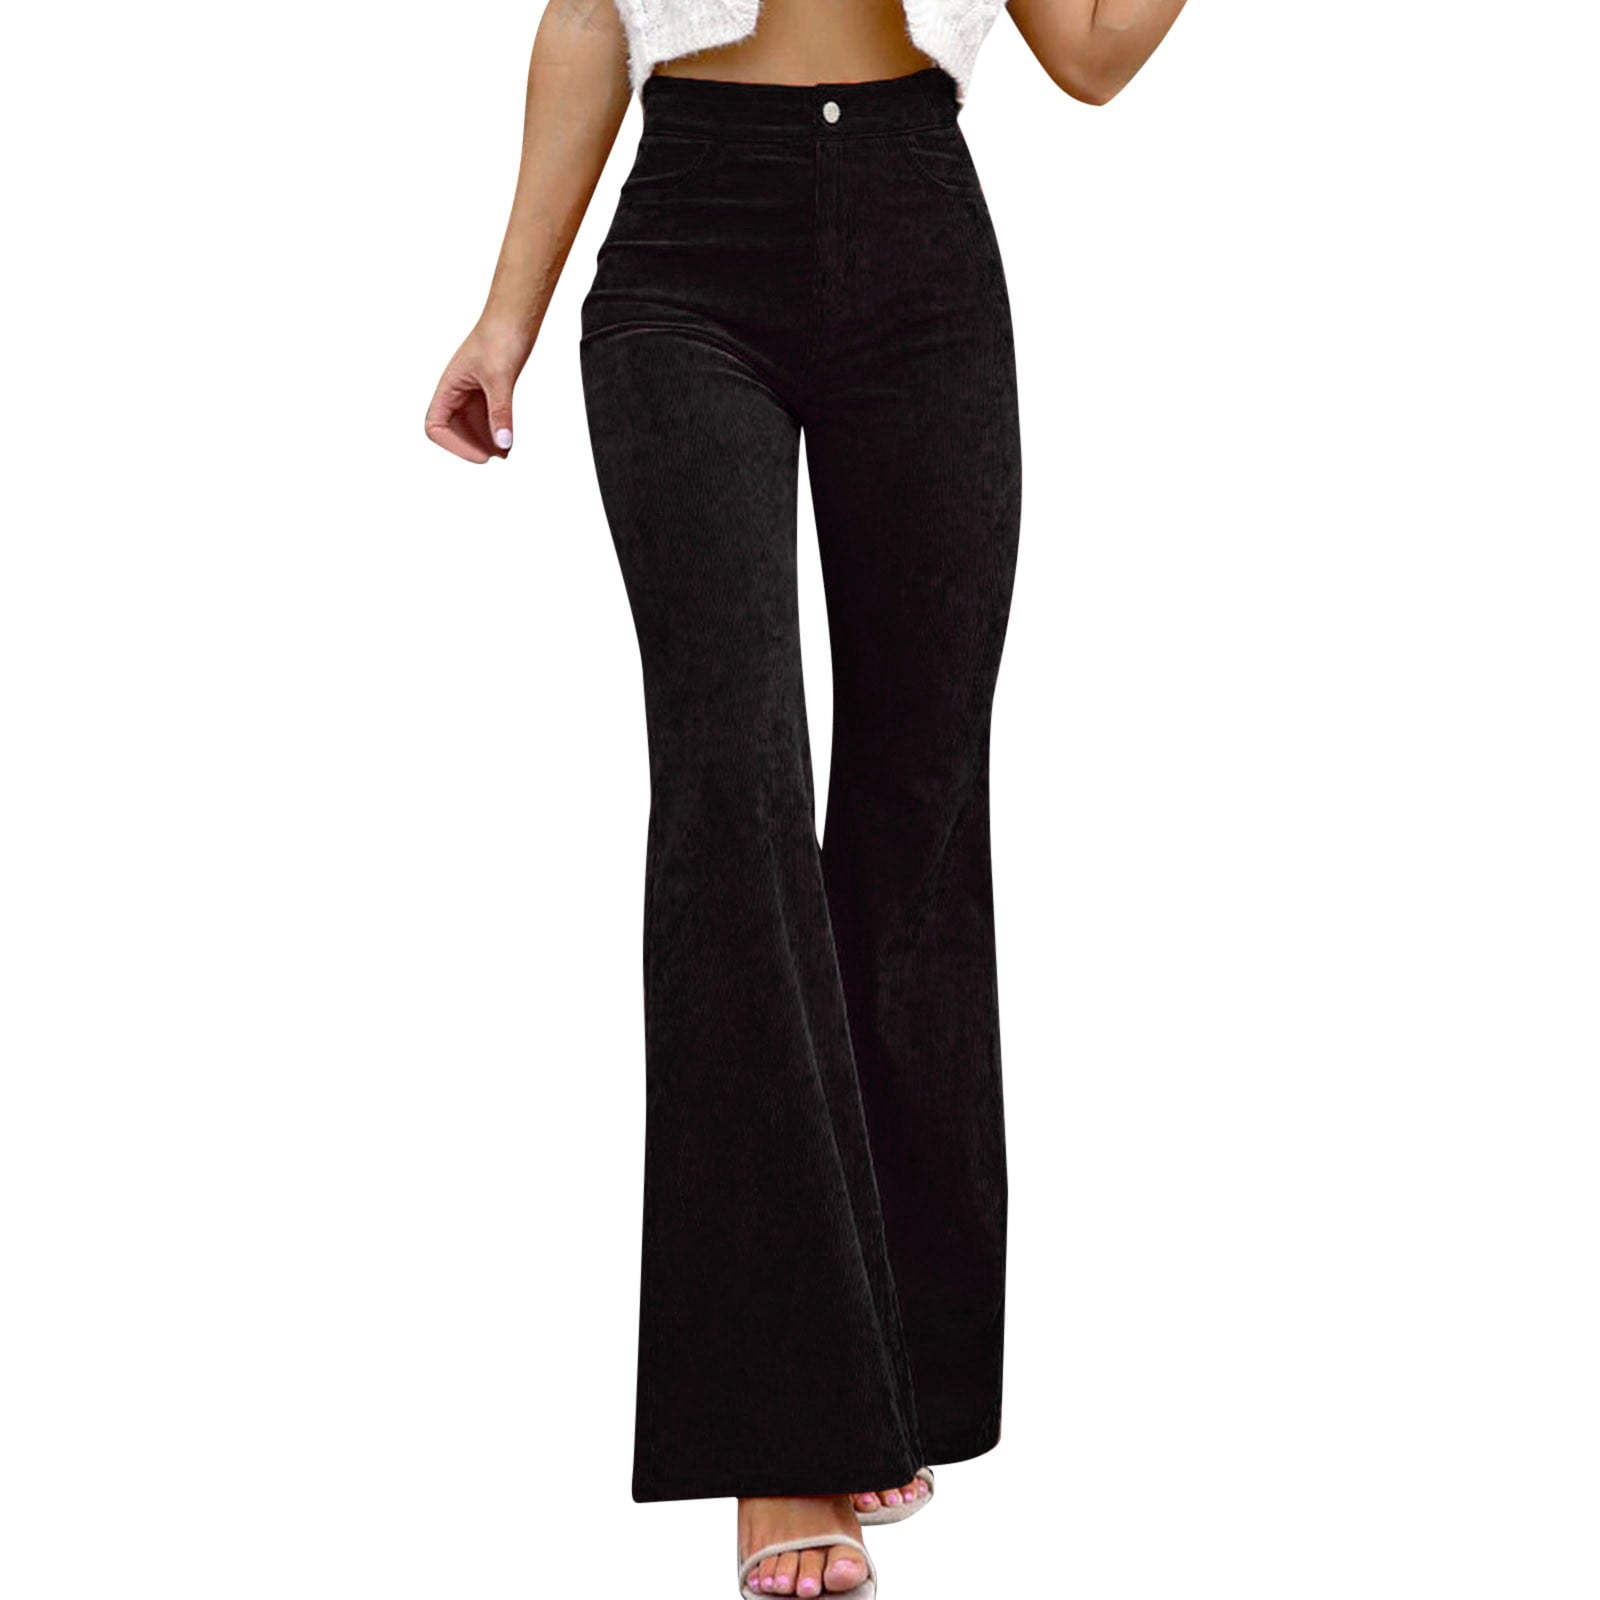 Spring Autumn Women Pants Clothing Solid Color Mid Waist Slim Bell Bottoms  Corduroy Elastic Waist Casual Trousers For Golf Lounge Work